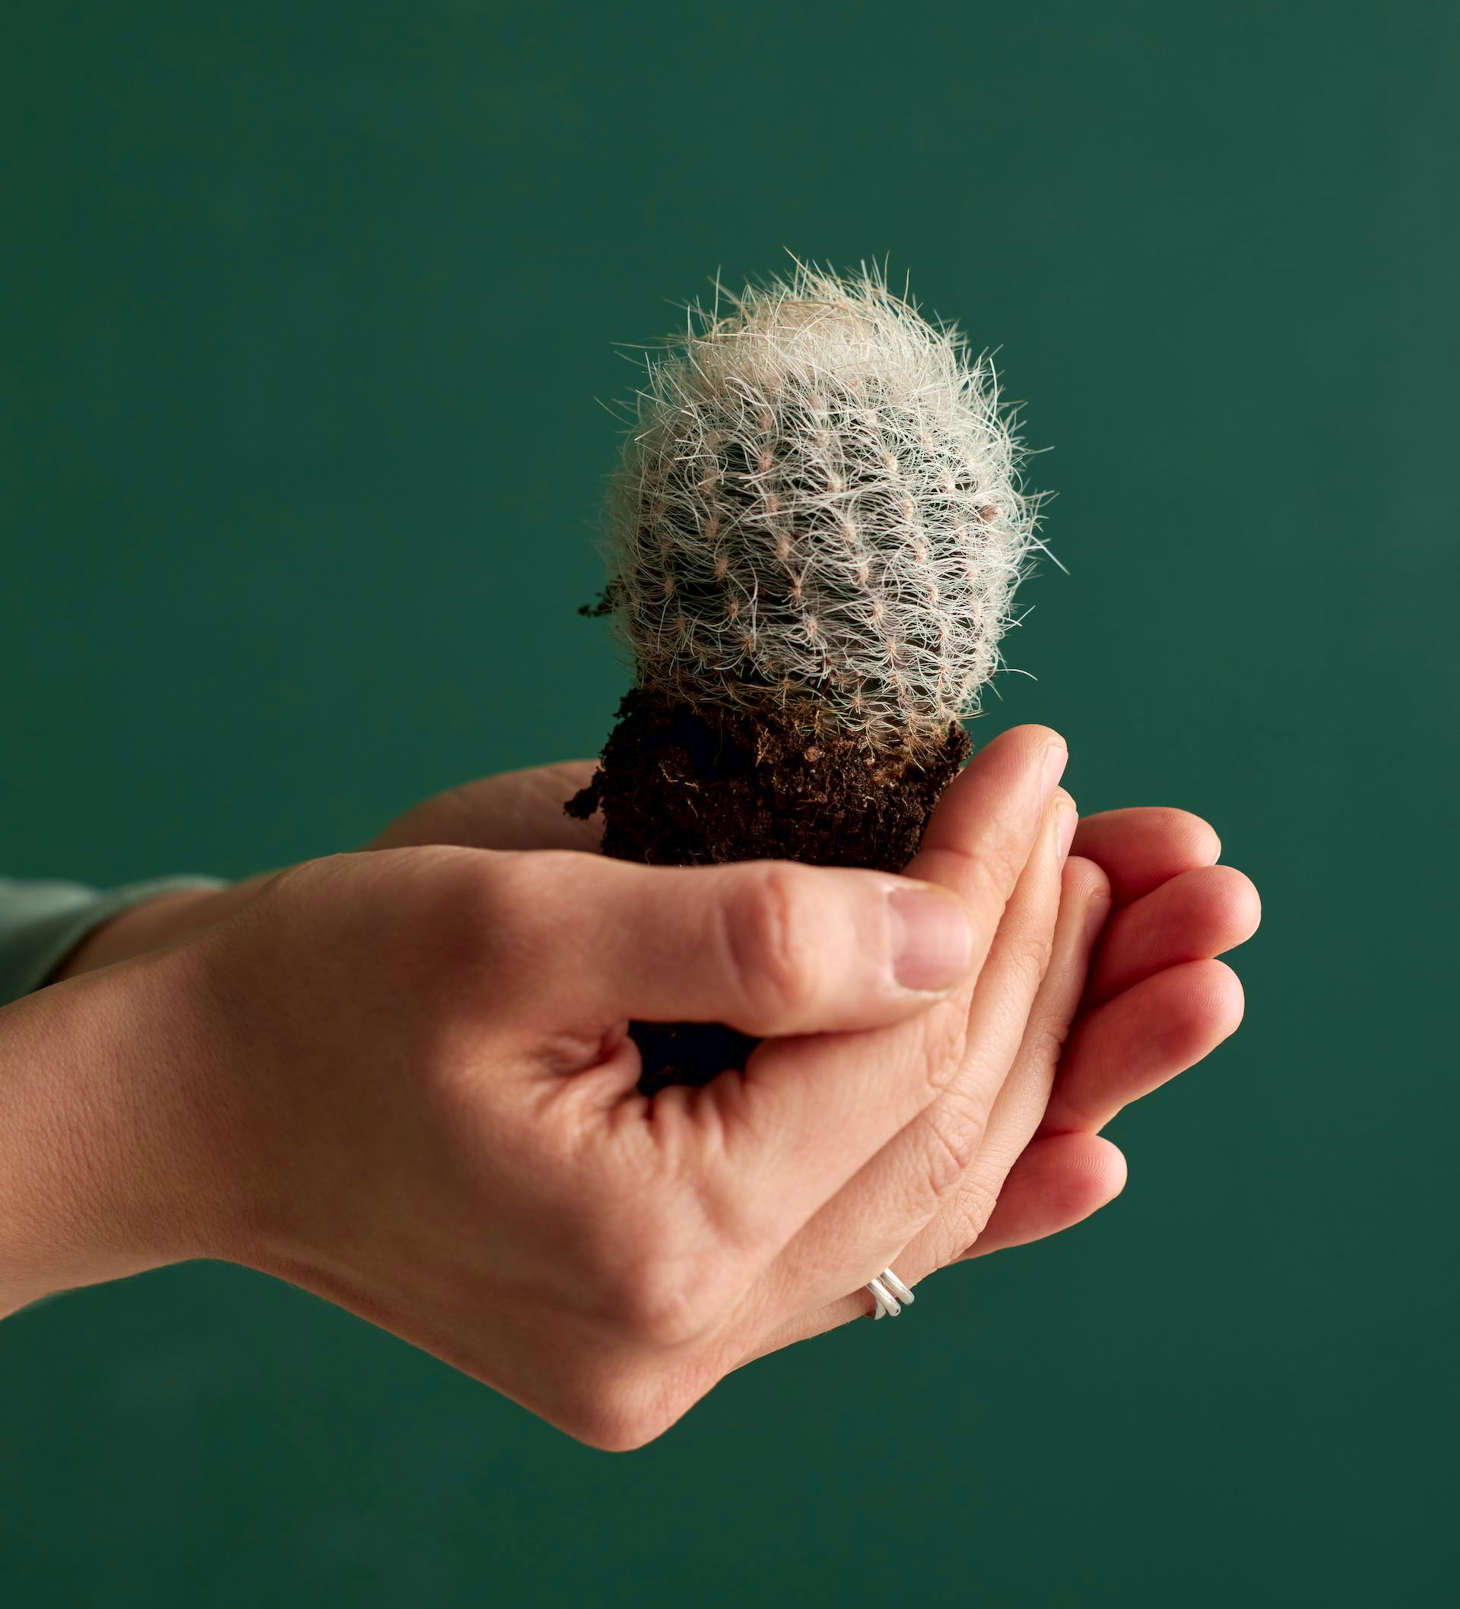 holding a spherical cactus